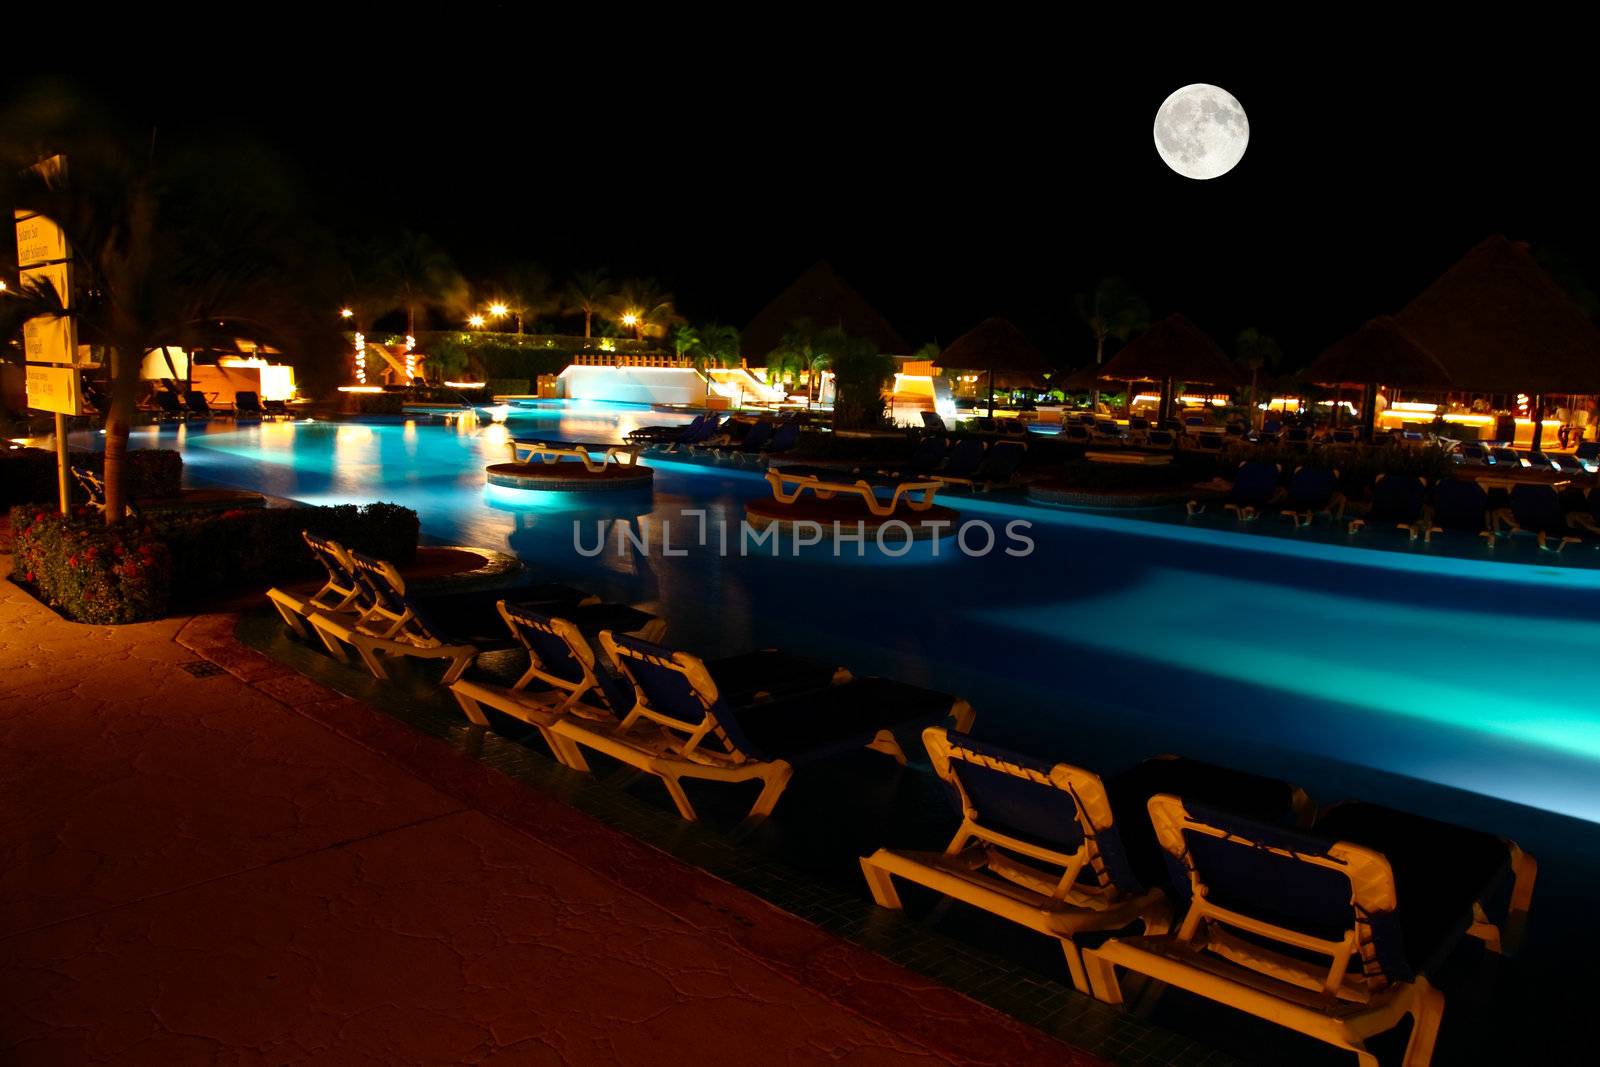 a luxury all inclusive beach resort at night by gary718